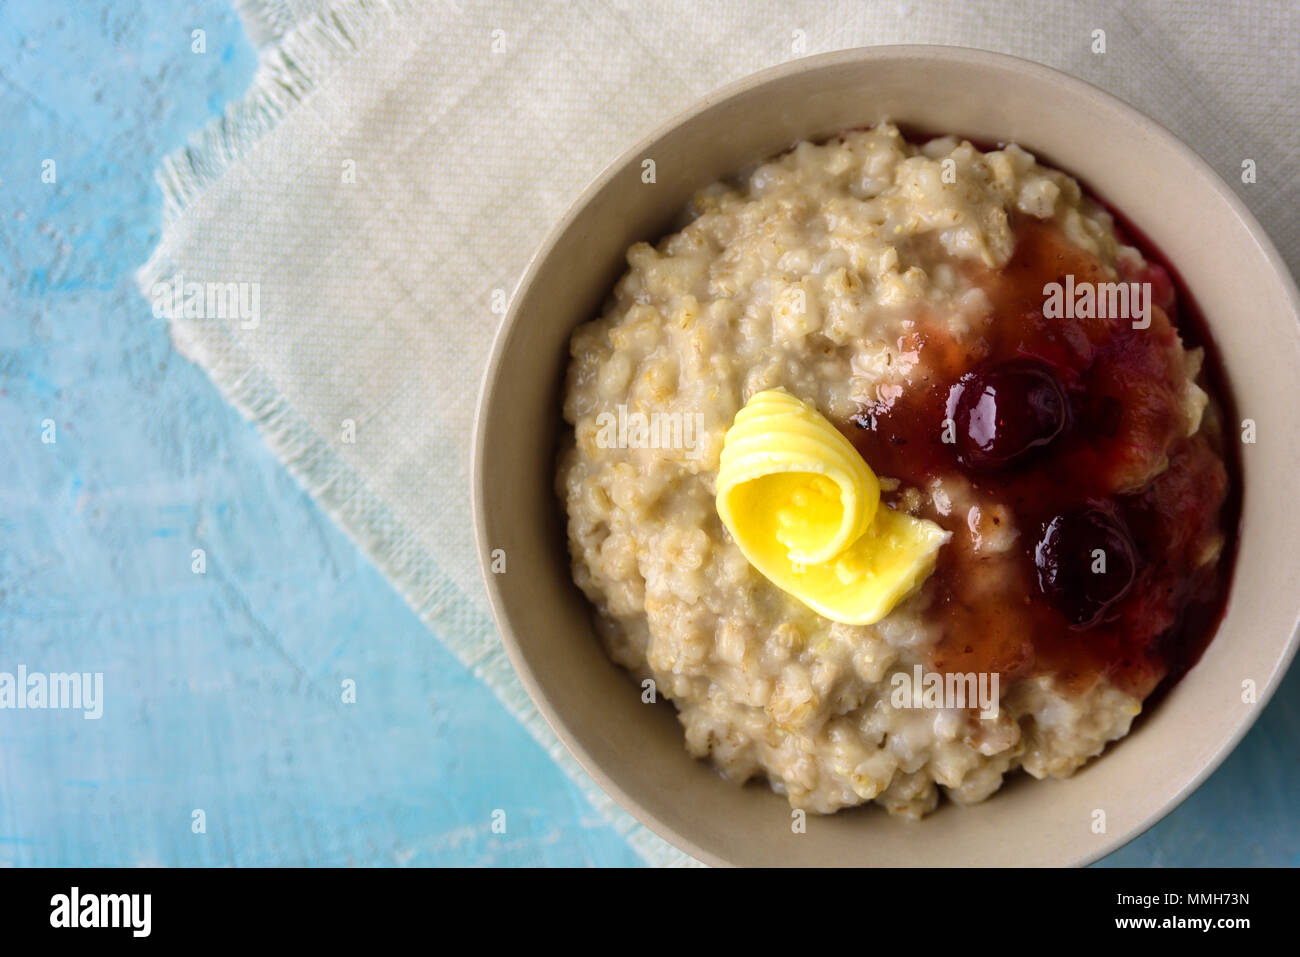 Oatmeal porrige with butter and cherry jam on blue table. With glass of milk. Breakfast Stock Photo